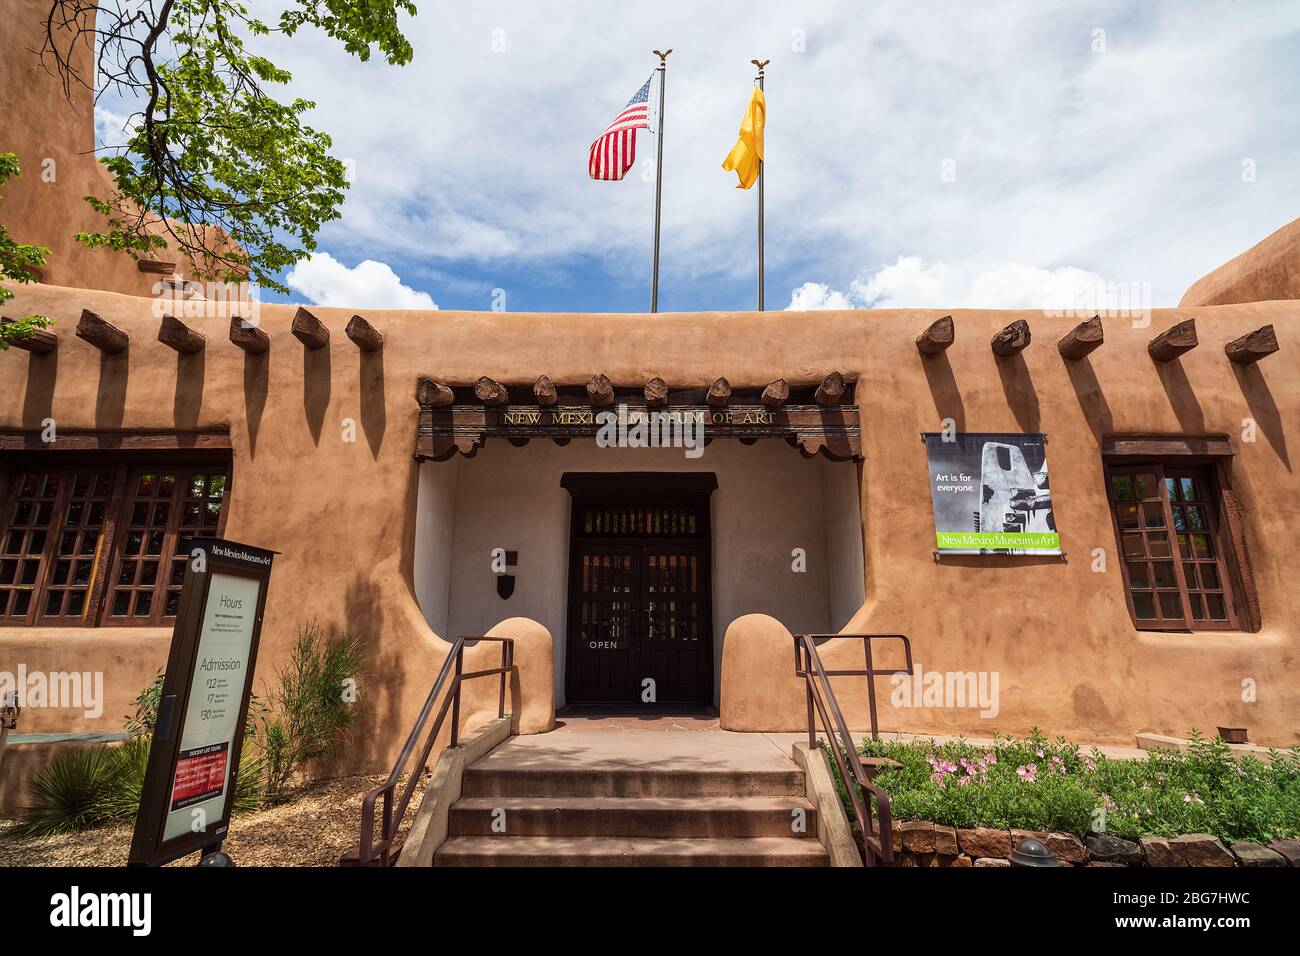 New Mexico Museum of Art building in Santa Fe, New Mexico Stock Photo